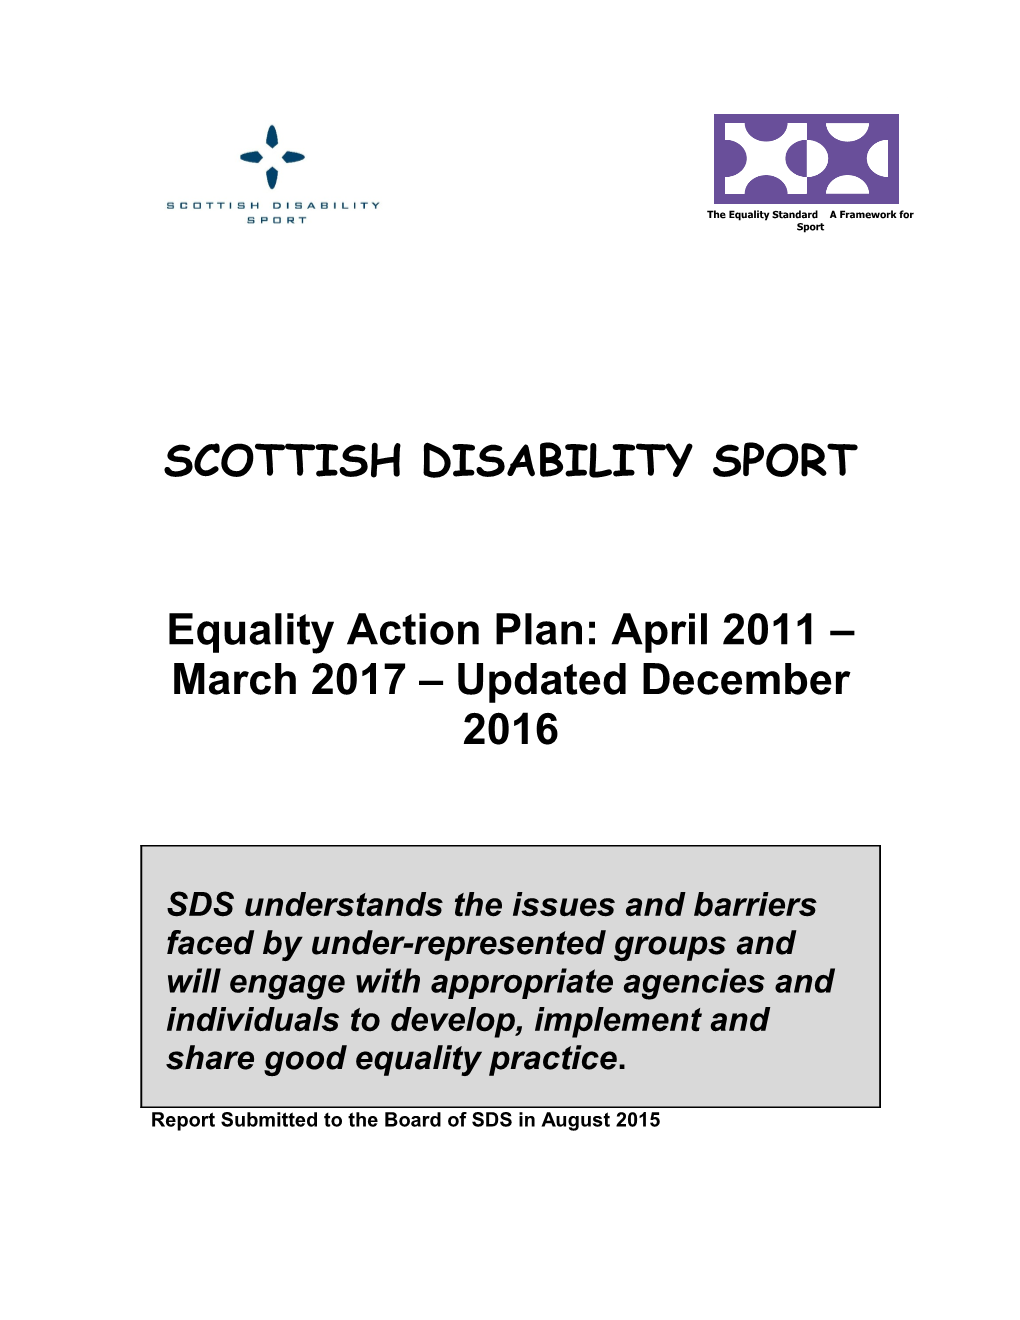 The Equity Standard for Sport